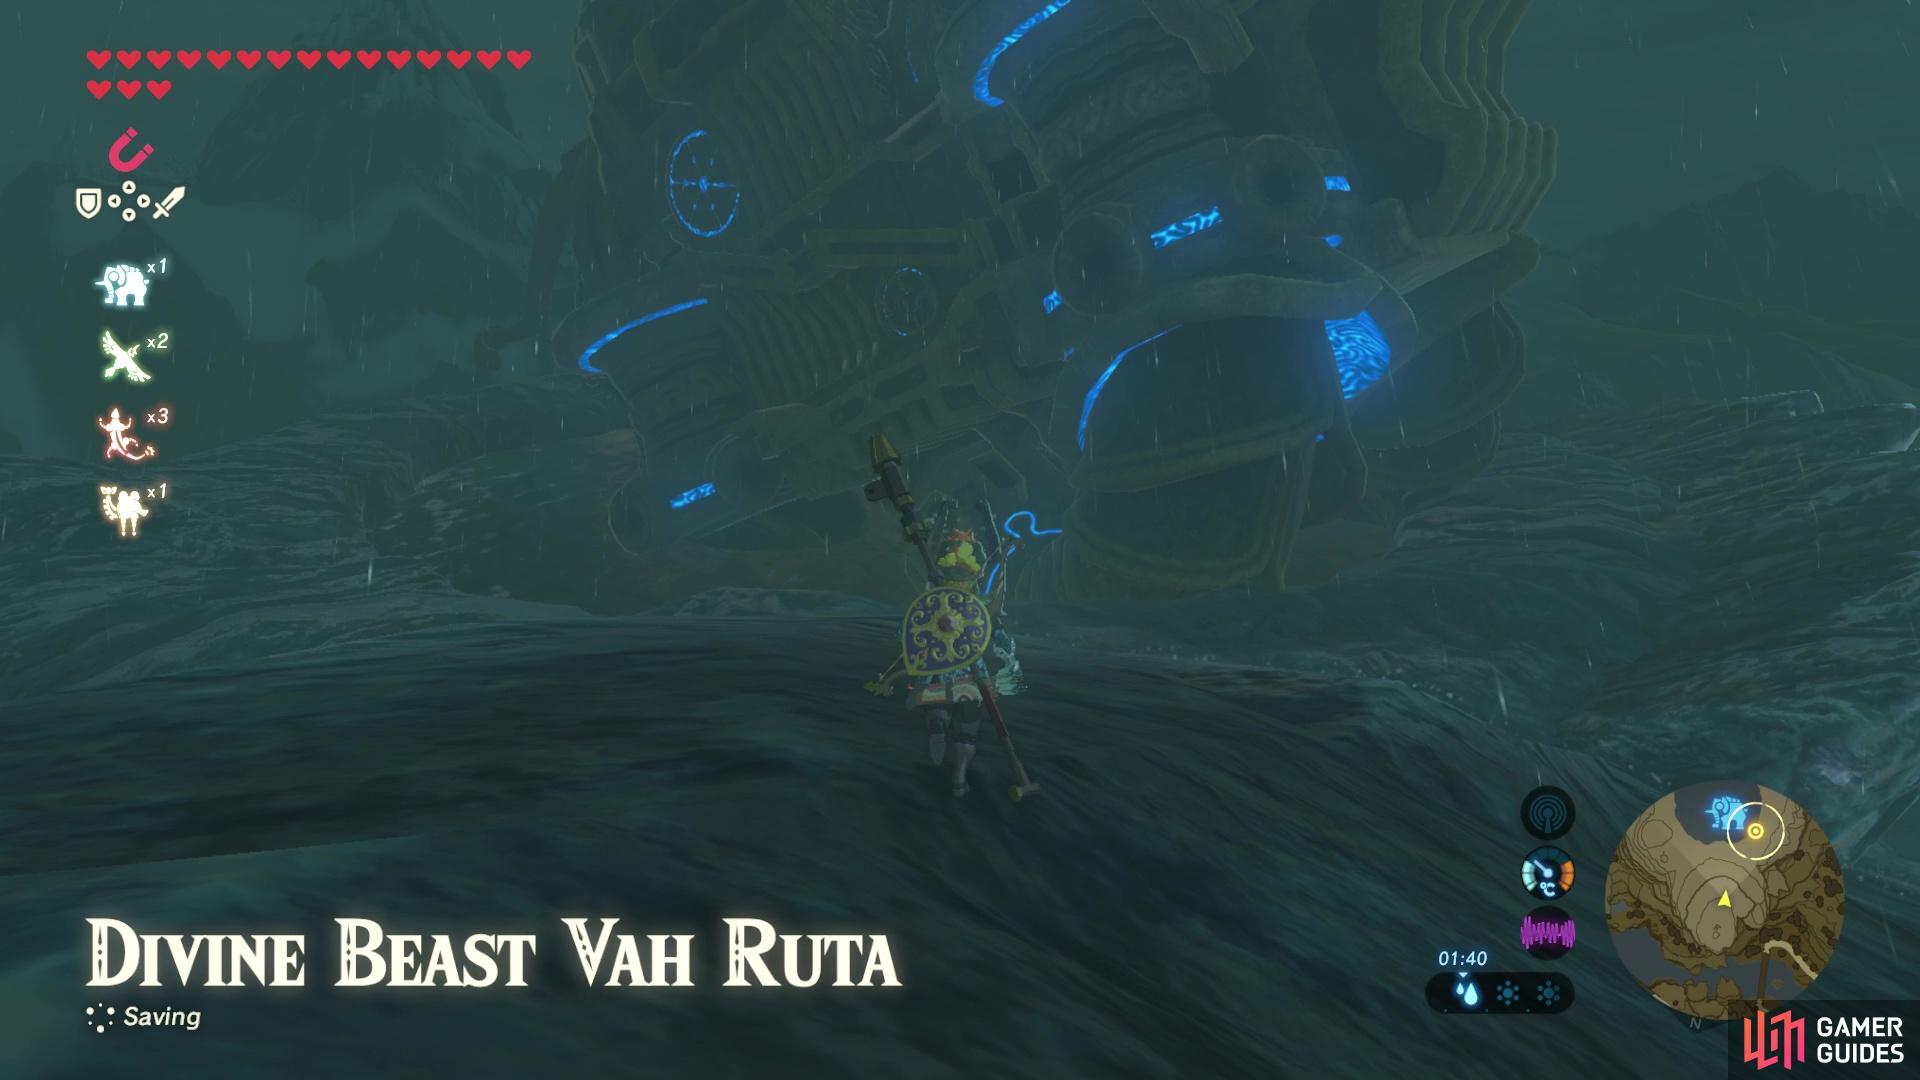 Time to head over to the Divine Beast Vah Ruta to face the final trial!